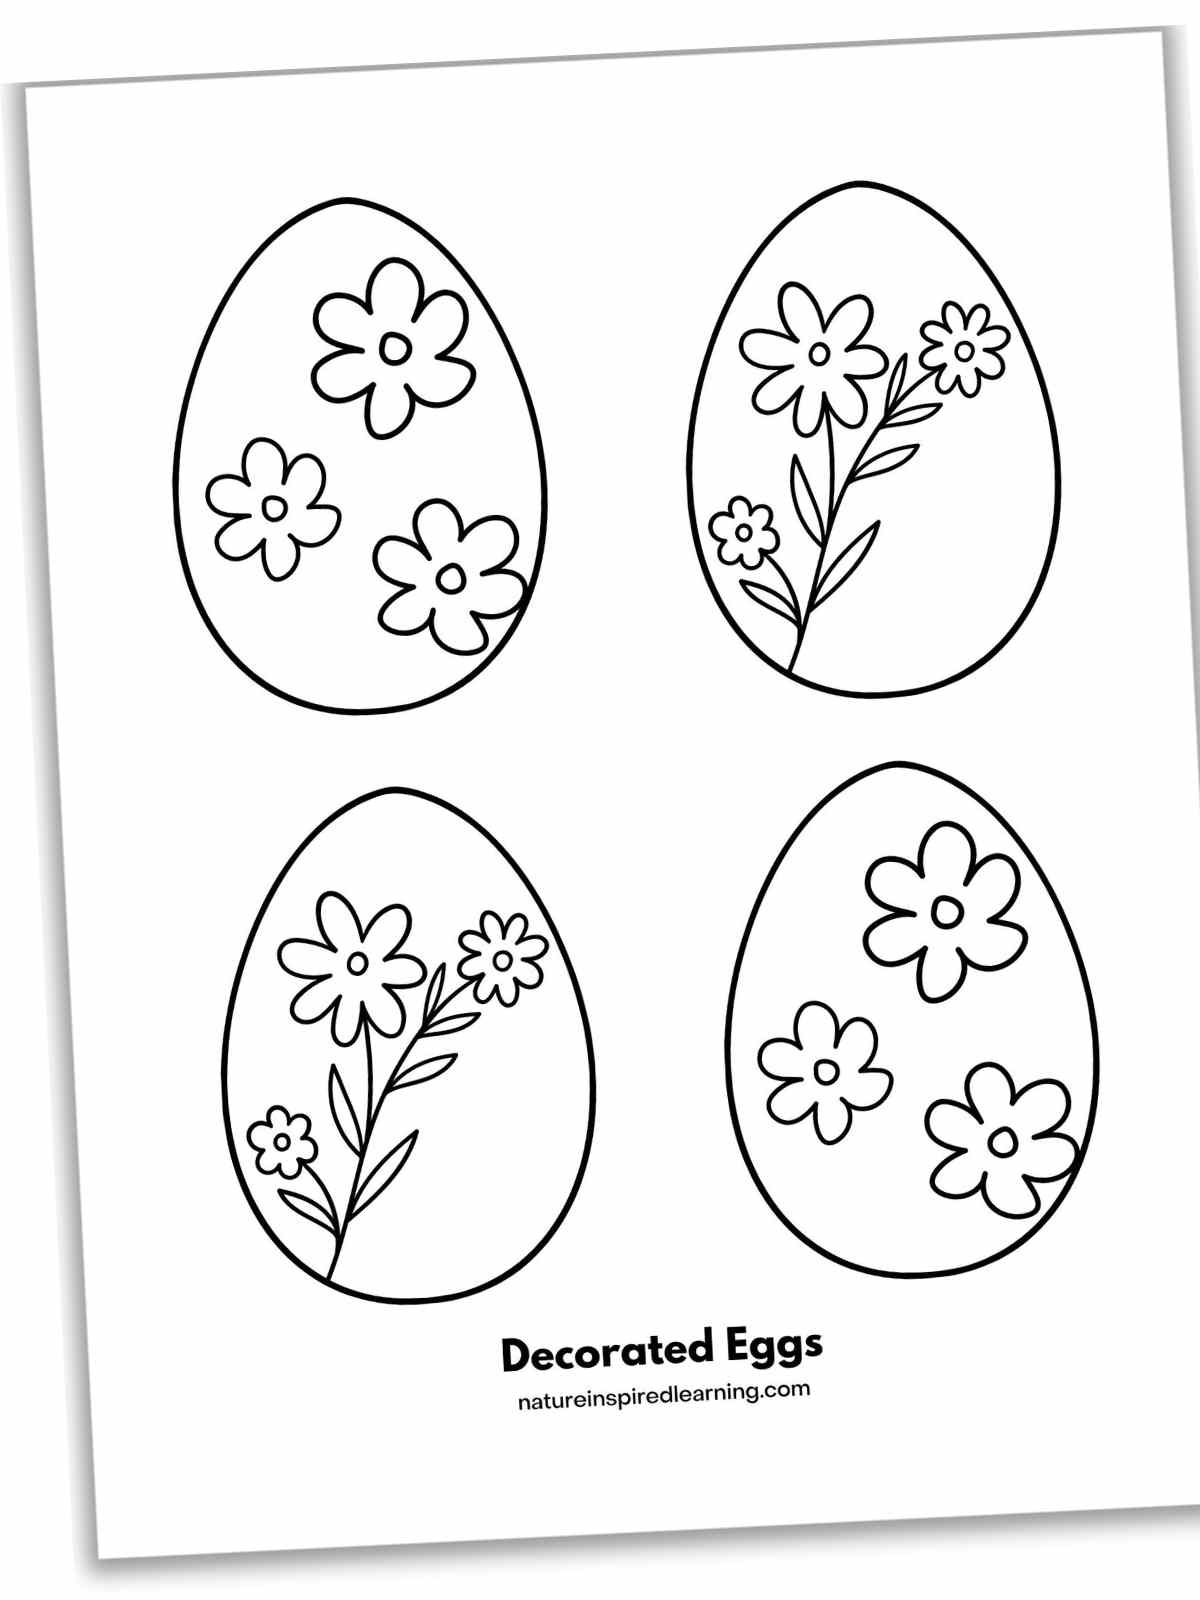 Four eggs arranged in two rows of two with flowers and flower stem designs on each